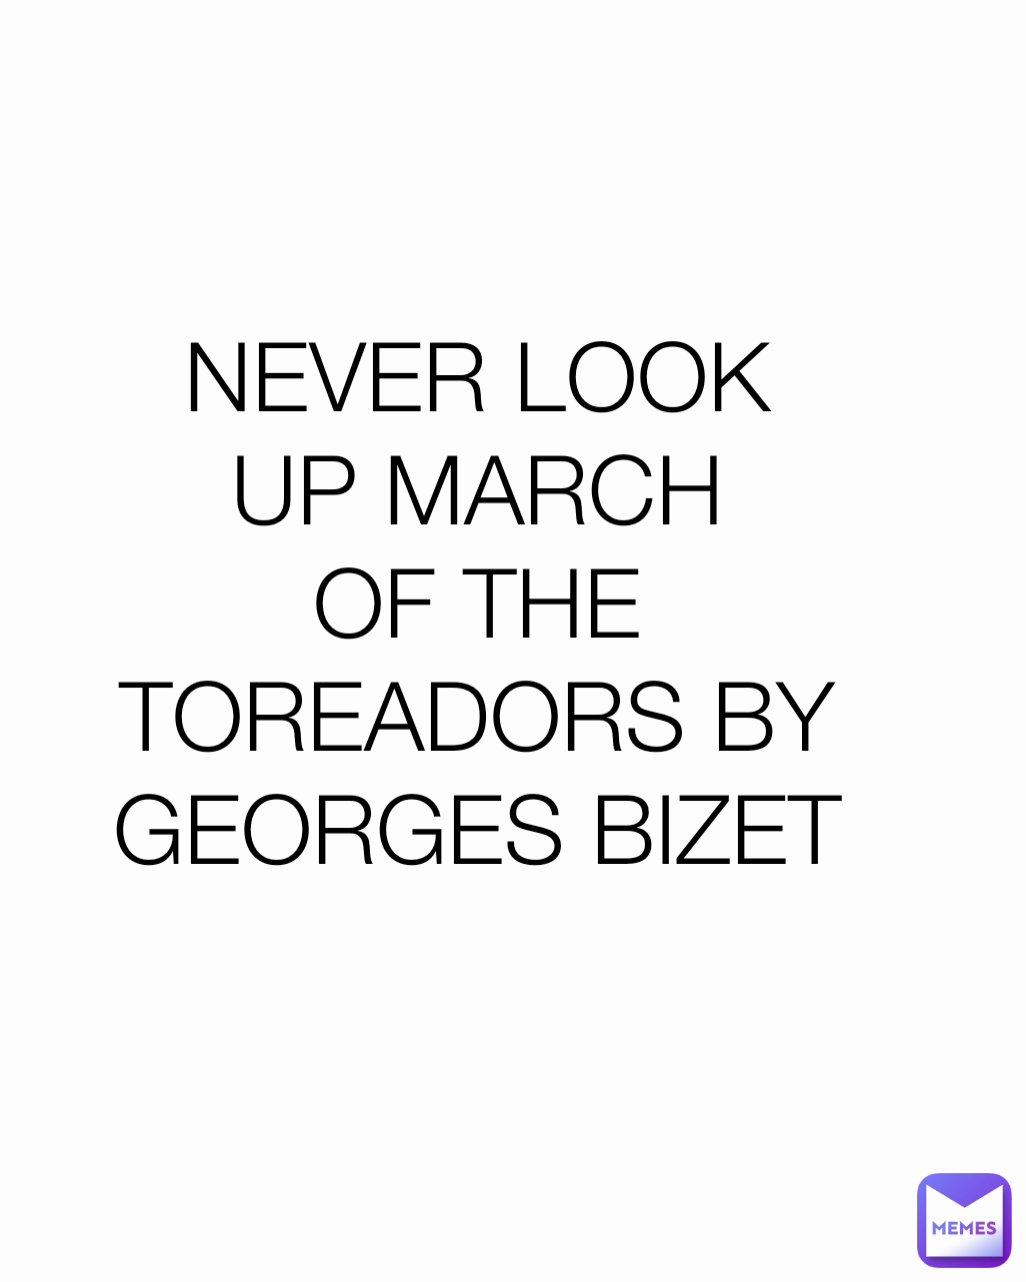 NEVER LOOK UP MARCH OF THE TOREADORS BY GEORGES BIZET